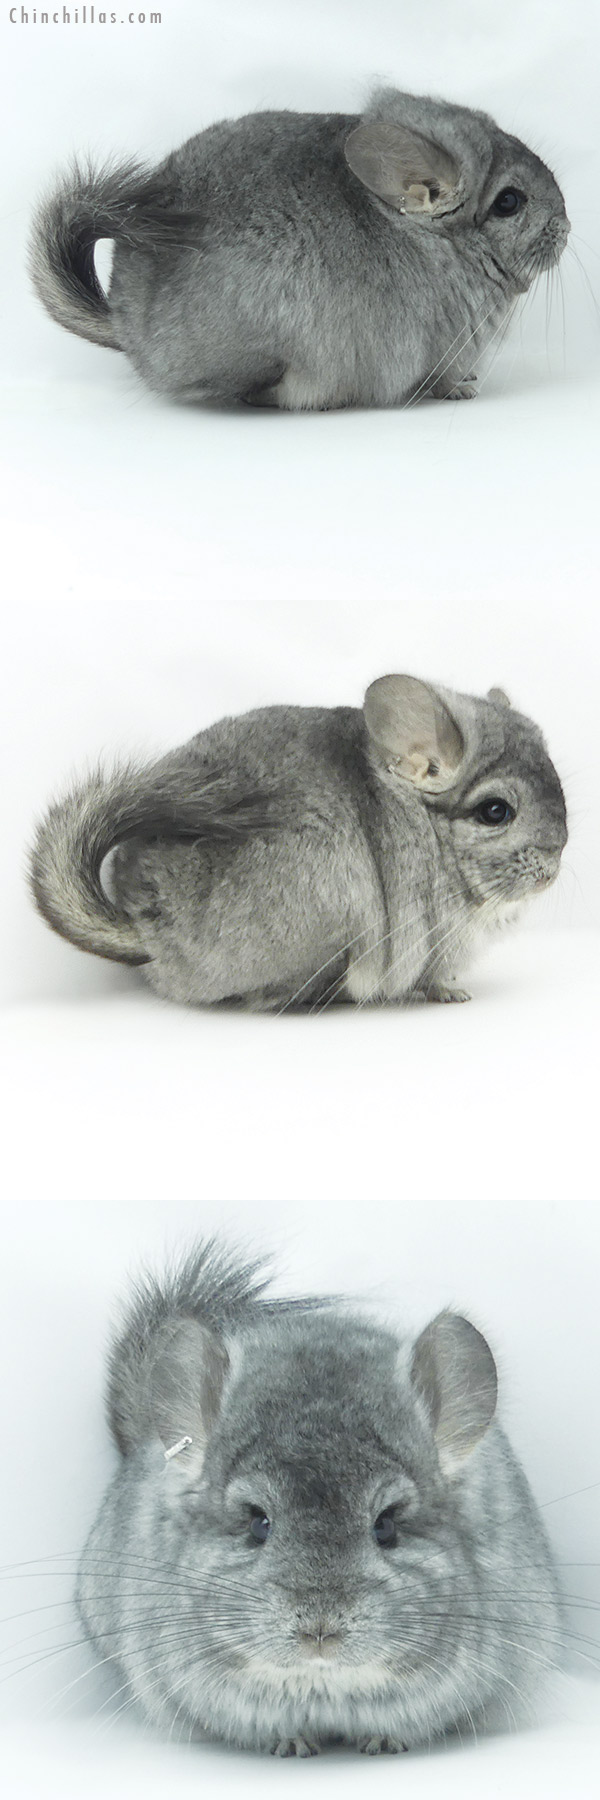 Chinchilla or related item offered for sale or export on Chinchillas.com - 20120 Exceptional Standard ( Sapphire Carrier )  Royal Persian Angora Male Chinchilla